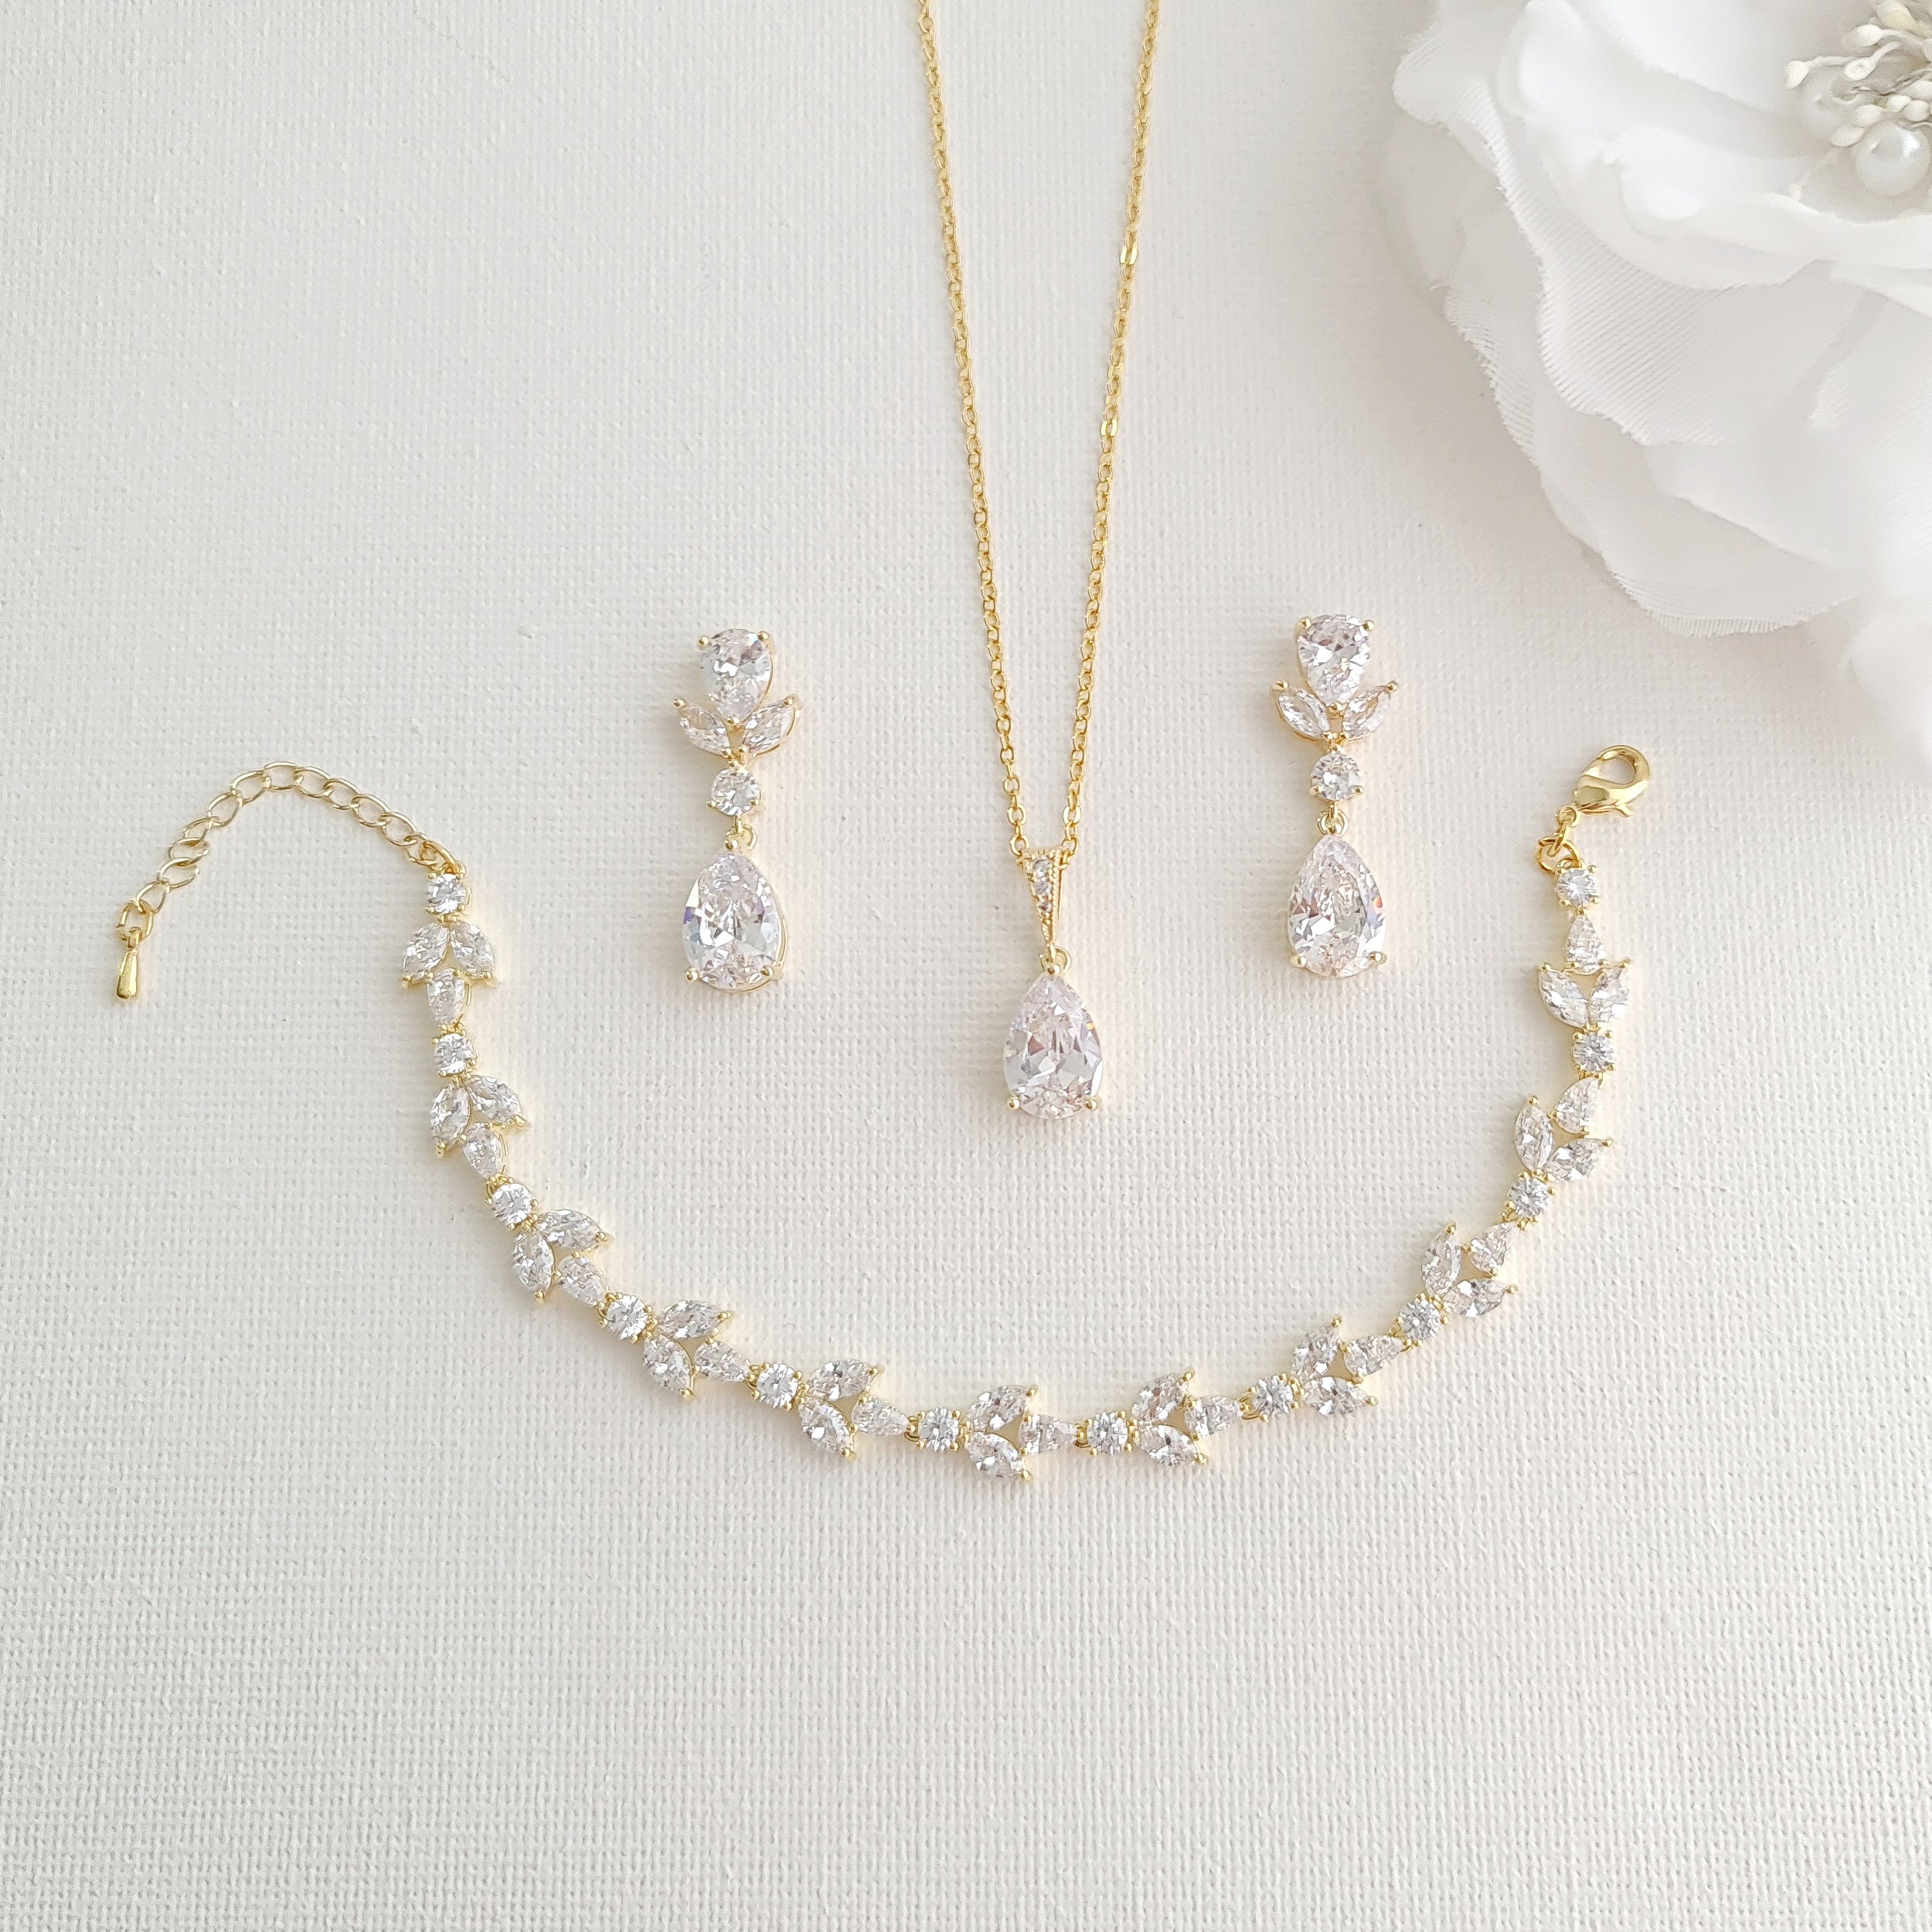 Dainty Wedding Bridal Jewelry Set, Sterling Silver Pearl Necklace and  Earrings Set, Dainty Pearl Necklace and Earrings, Pearl Jewelry Set - Etsy